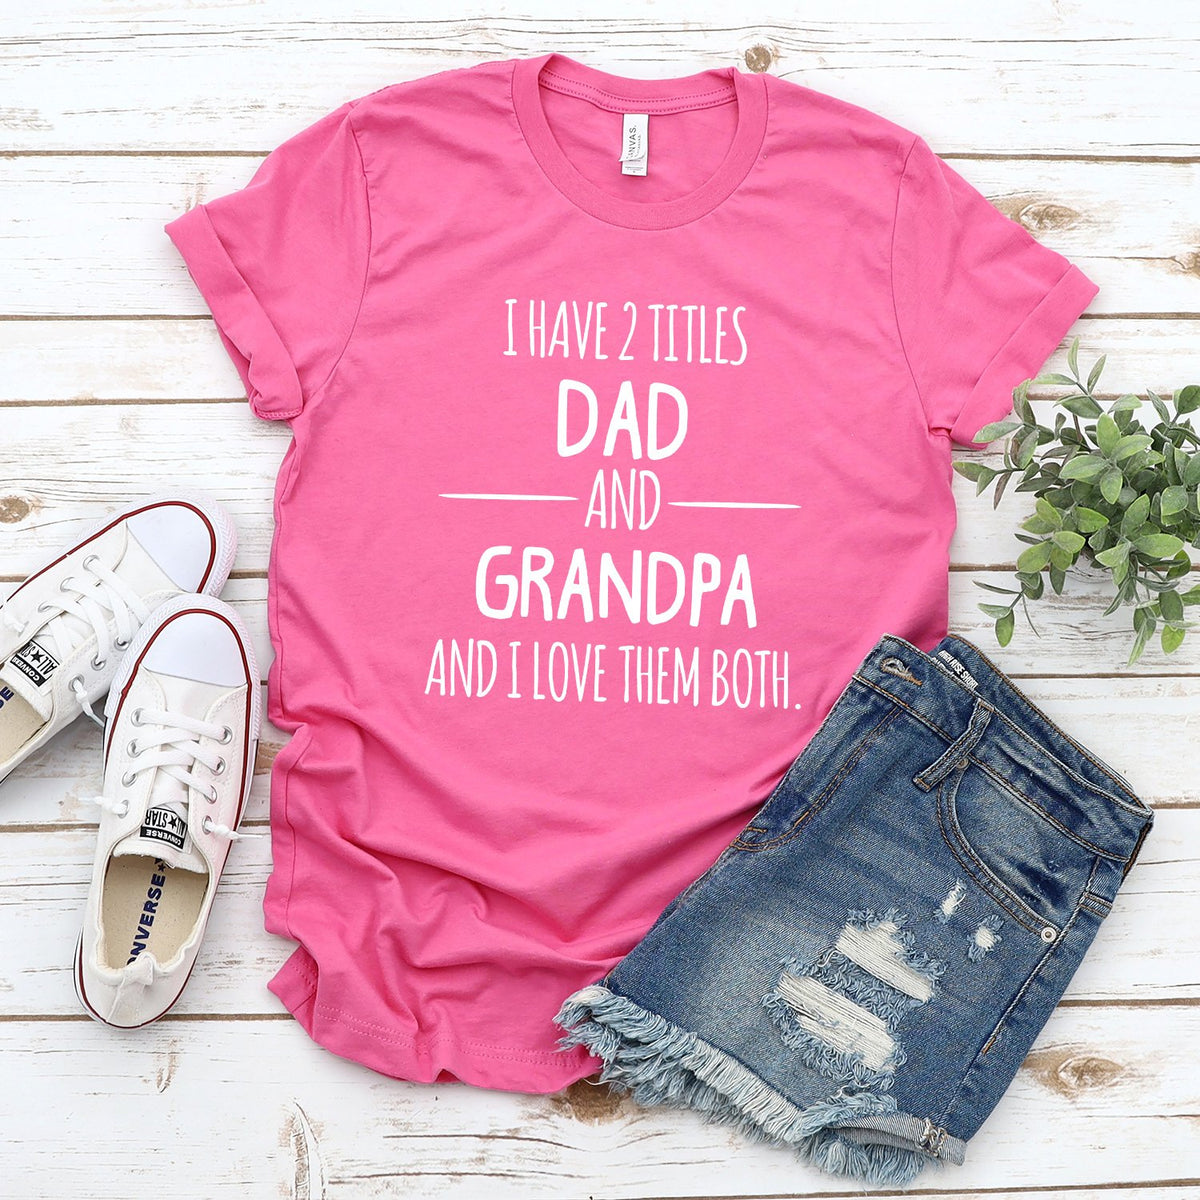 I Have 2 Titles Dad and Grandpa and I Love Them Both - Short Sleeve Tee Shirt